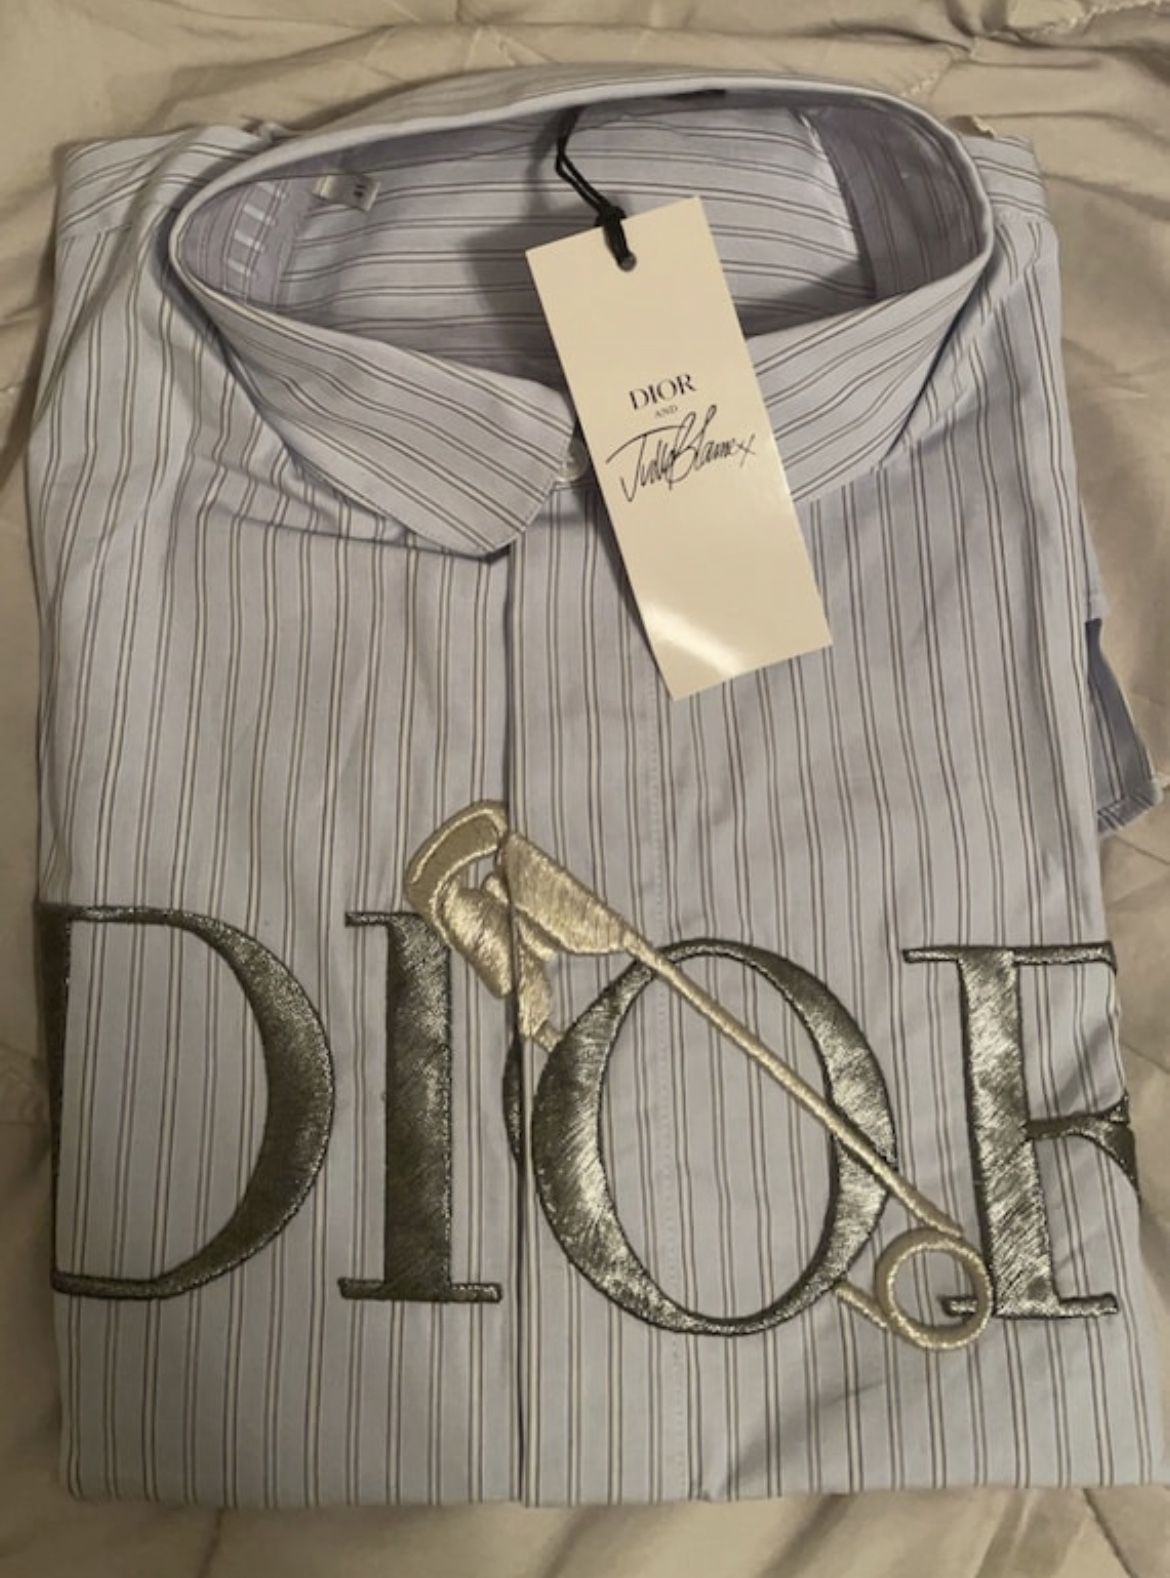 DIOR Winter 2020 Men’s Button Up SIZE LARGE